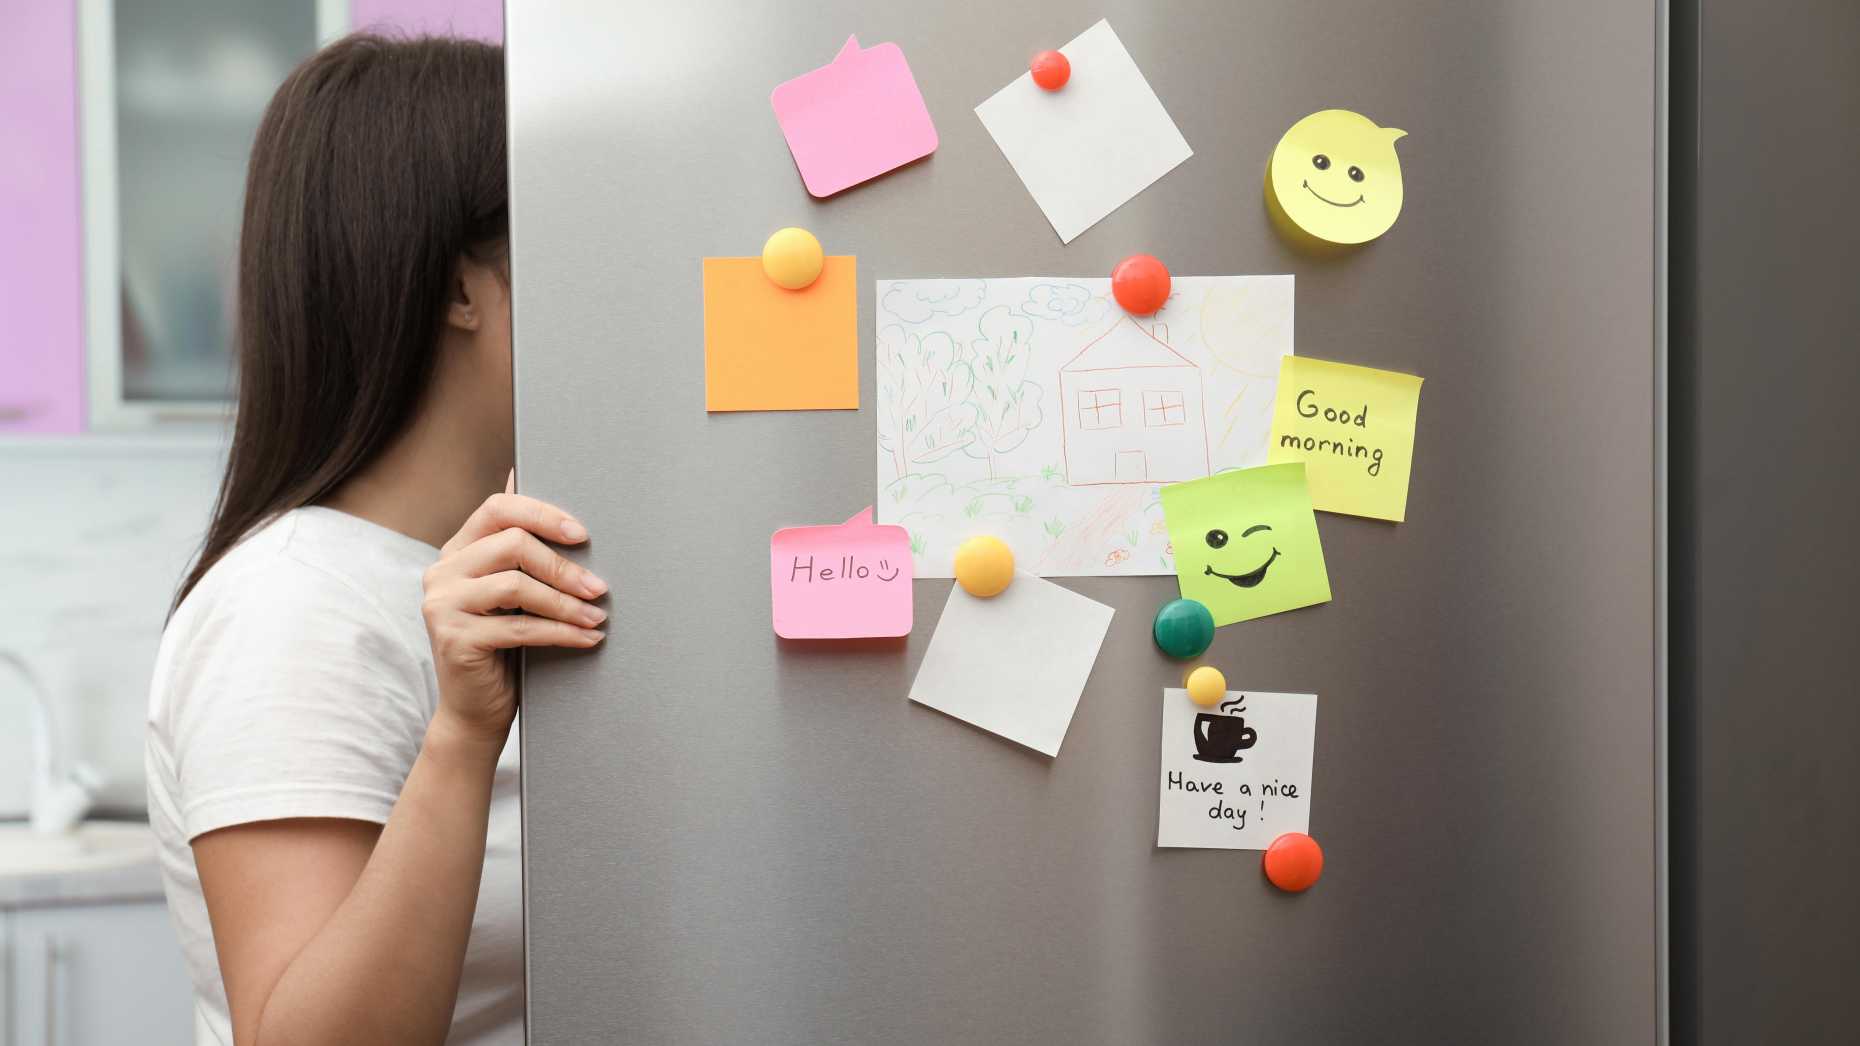 A woman opens the fridge and looks inside. The fridge door is covered in magnets and post-its